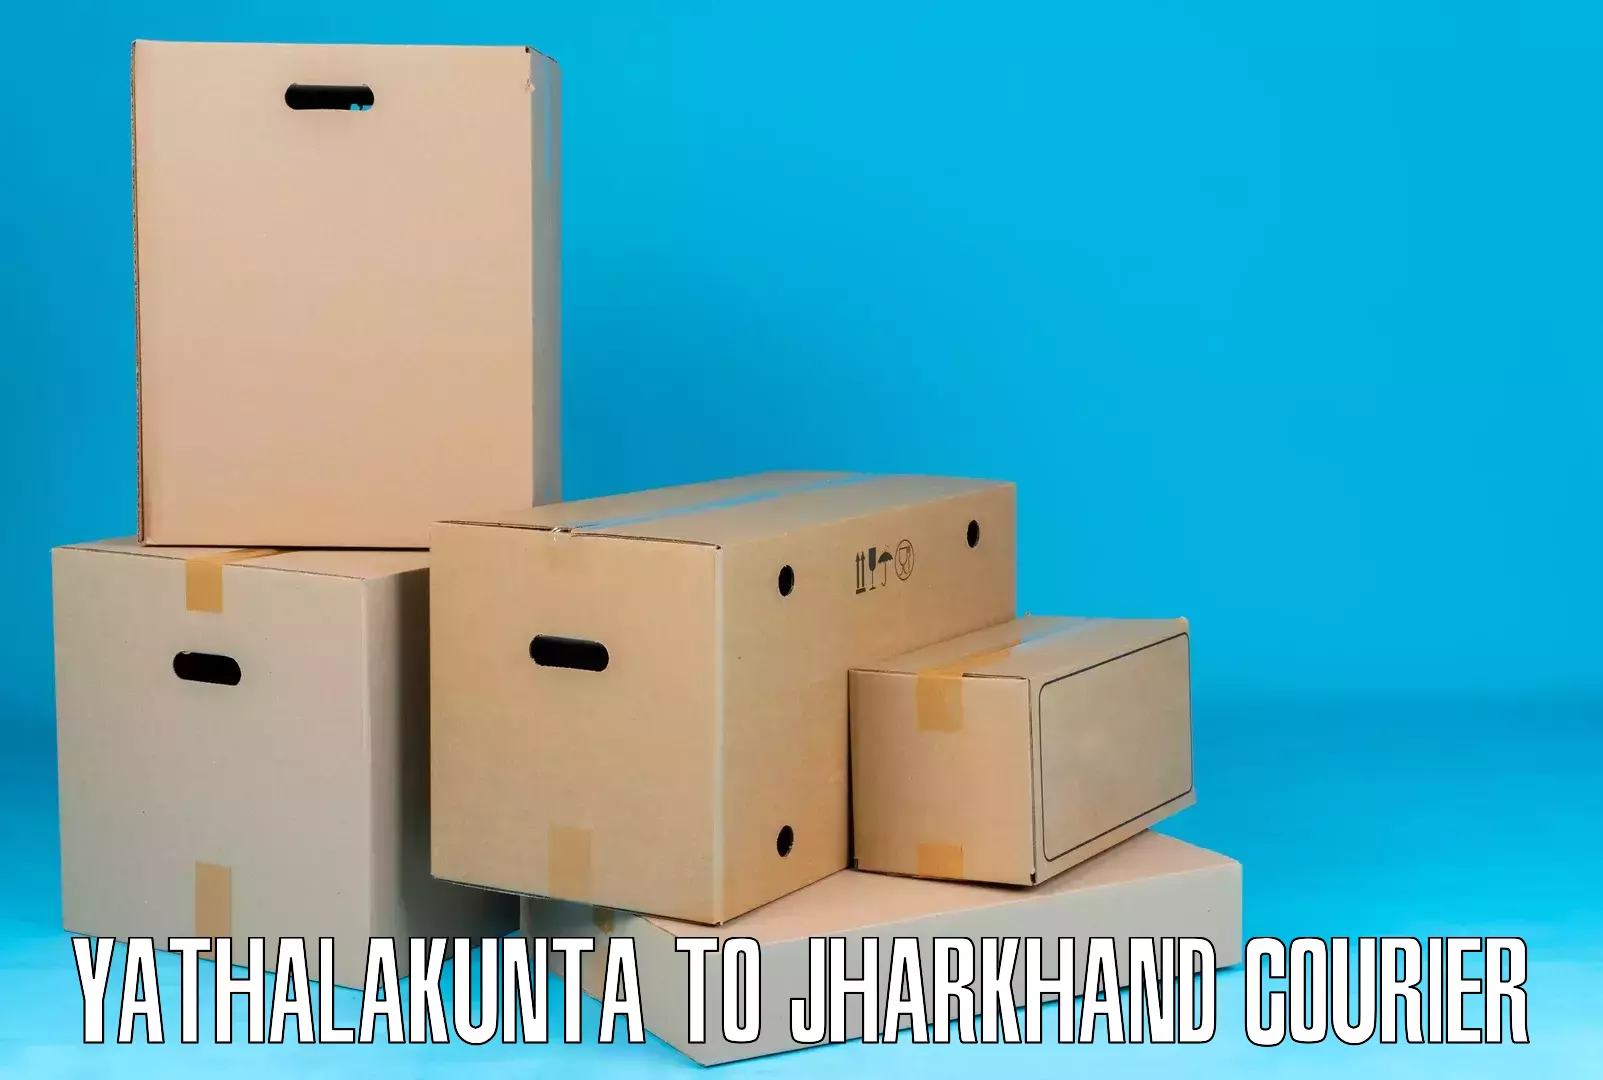 Corporate courier solutions Yathalakunta to Chaibasa